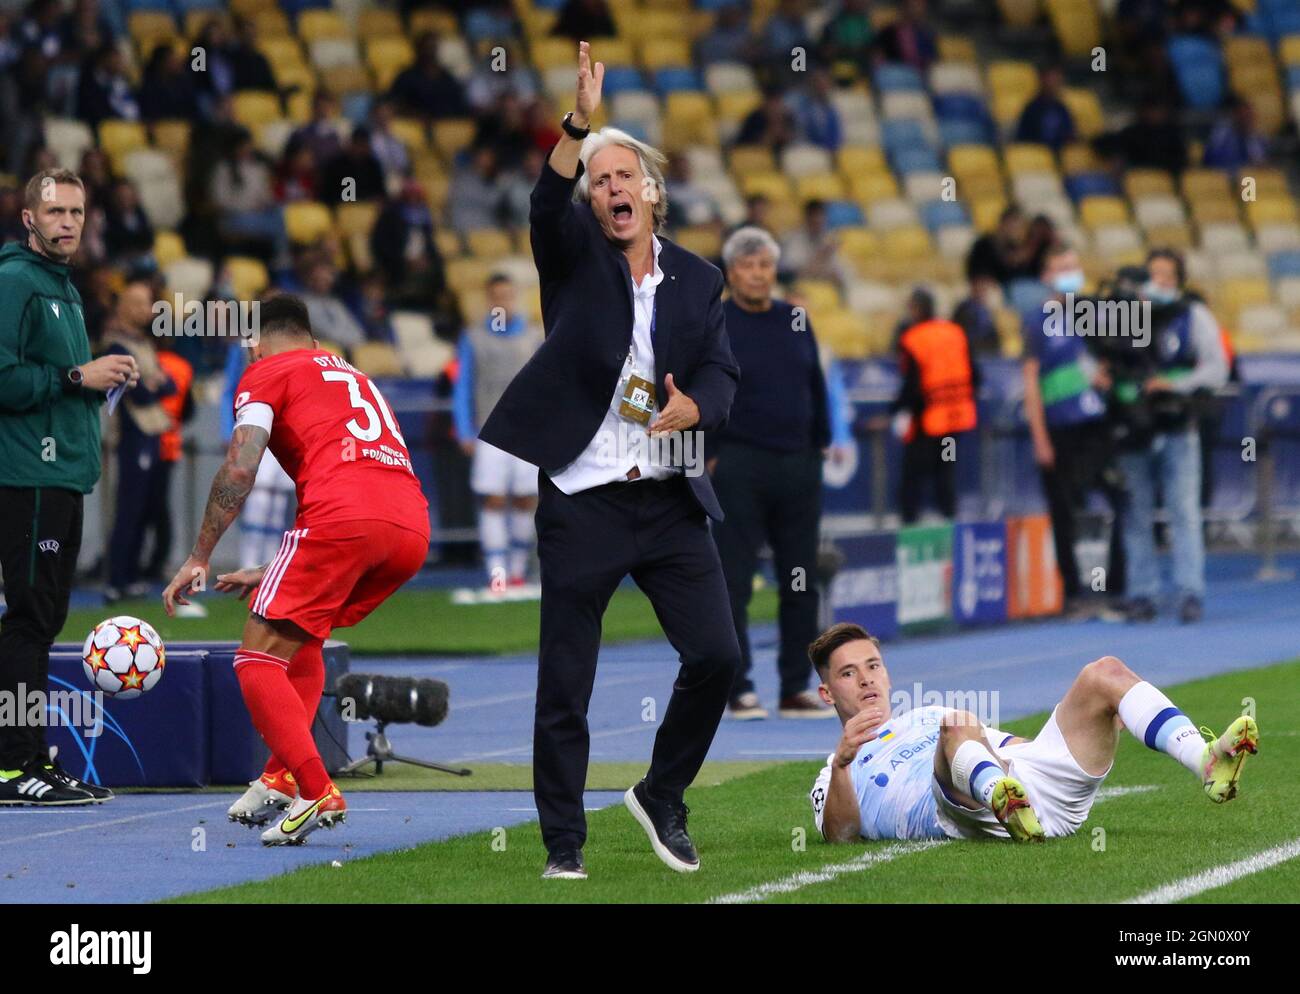 KYIV, UKRAINE - SEPTEMBER 14, 2021: Benfica manager Jorge Jesus in action during the UEFA Champions League game against Dynamo Kyiv at NSC Olimpiyskyi stadium in Kyiv Stock Photo